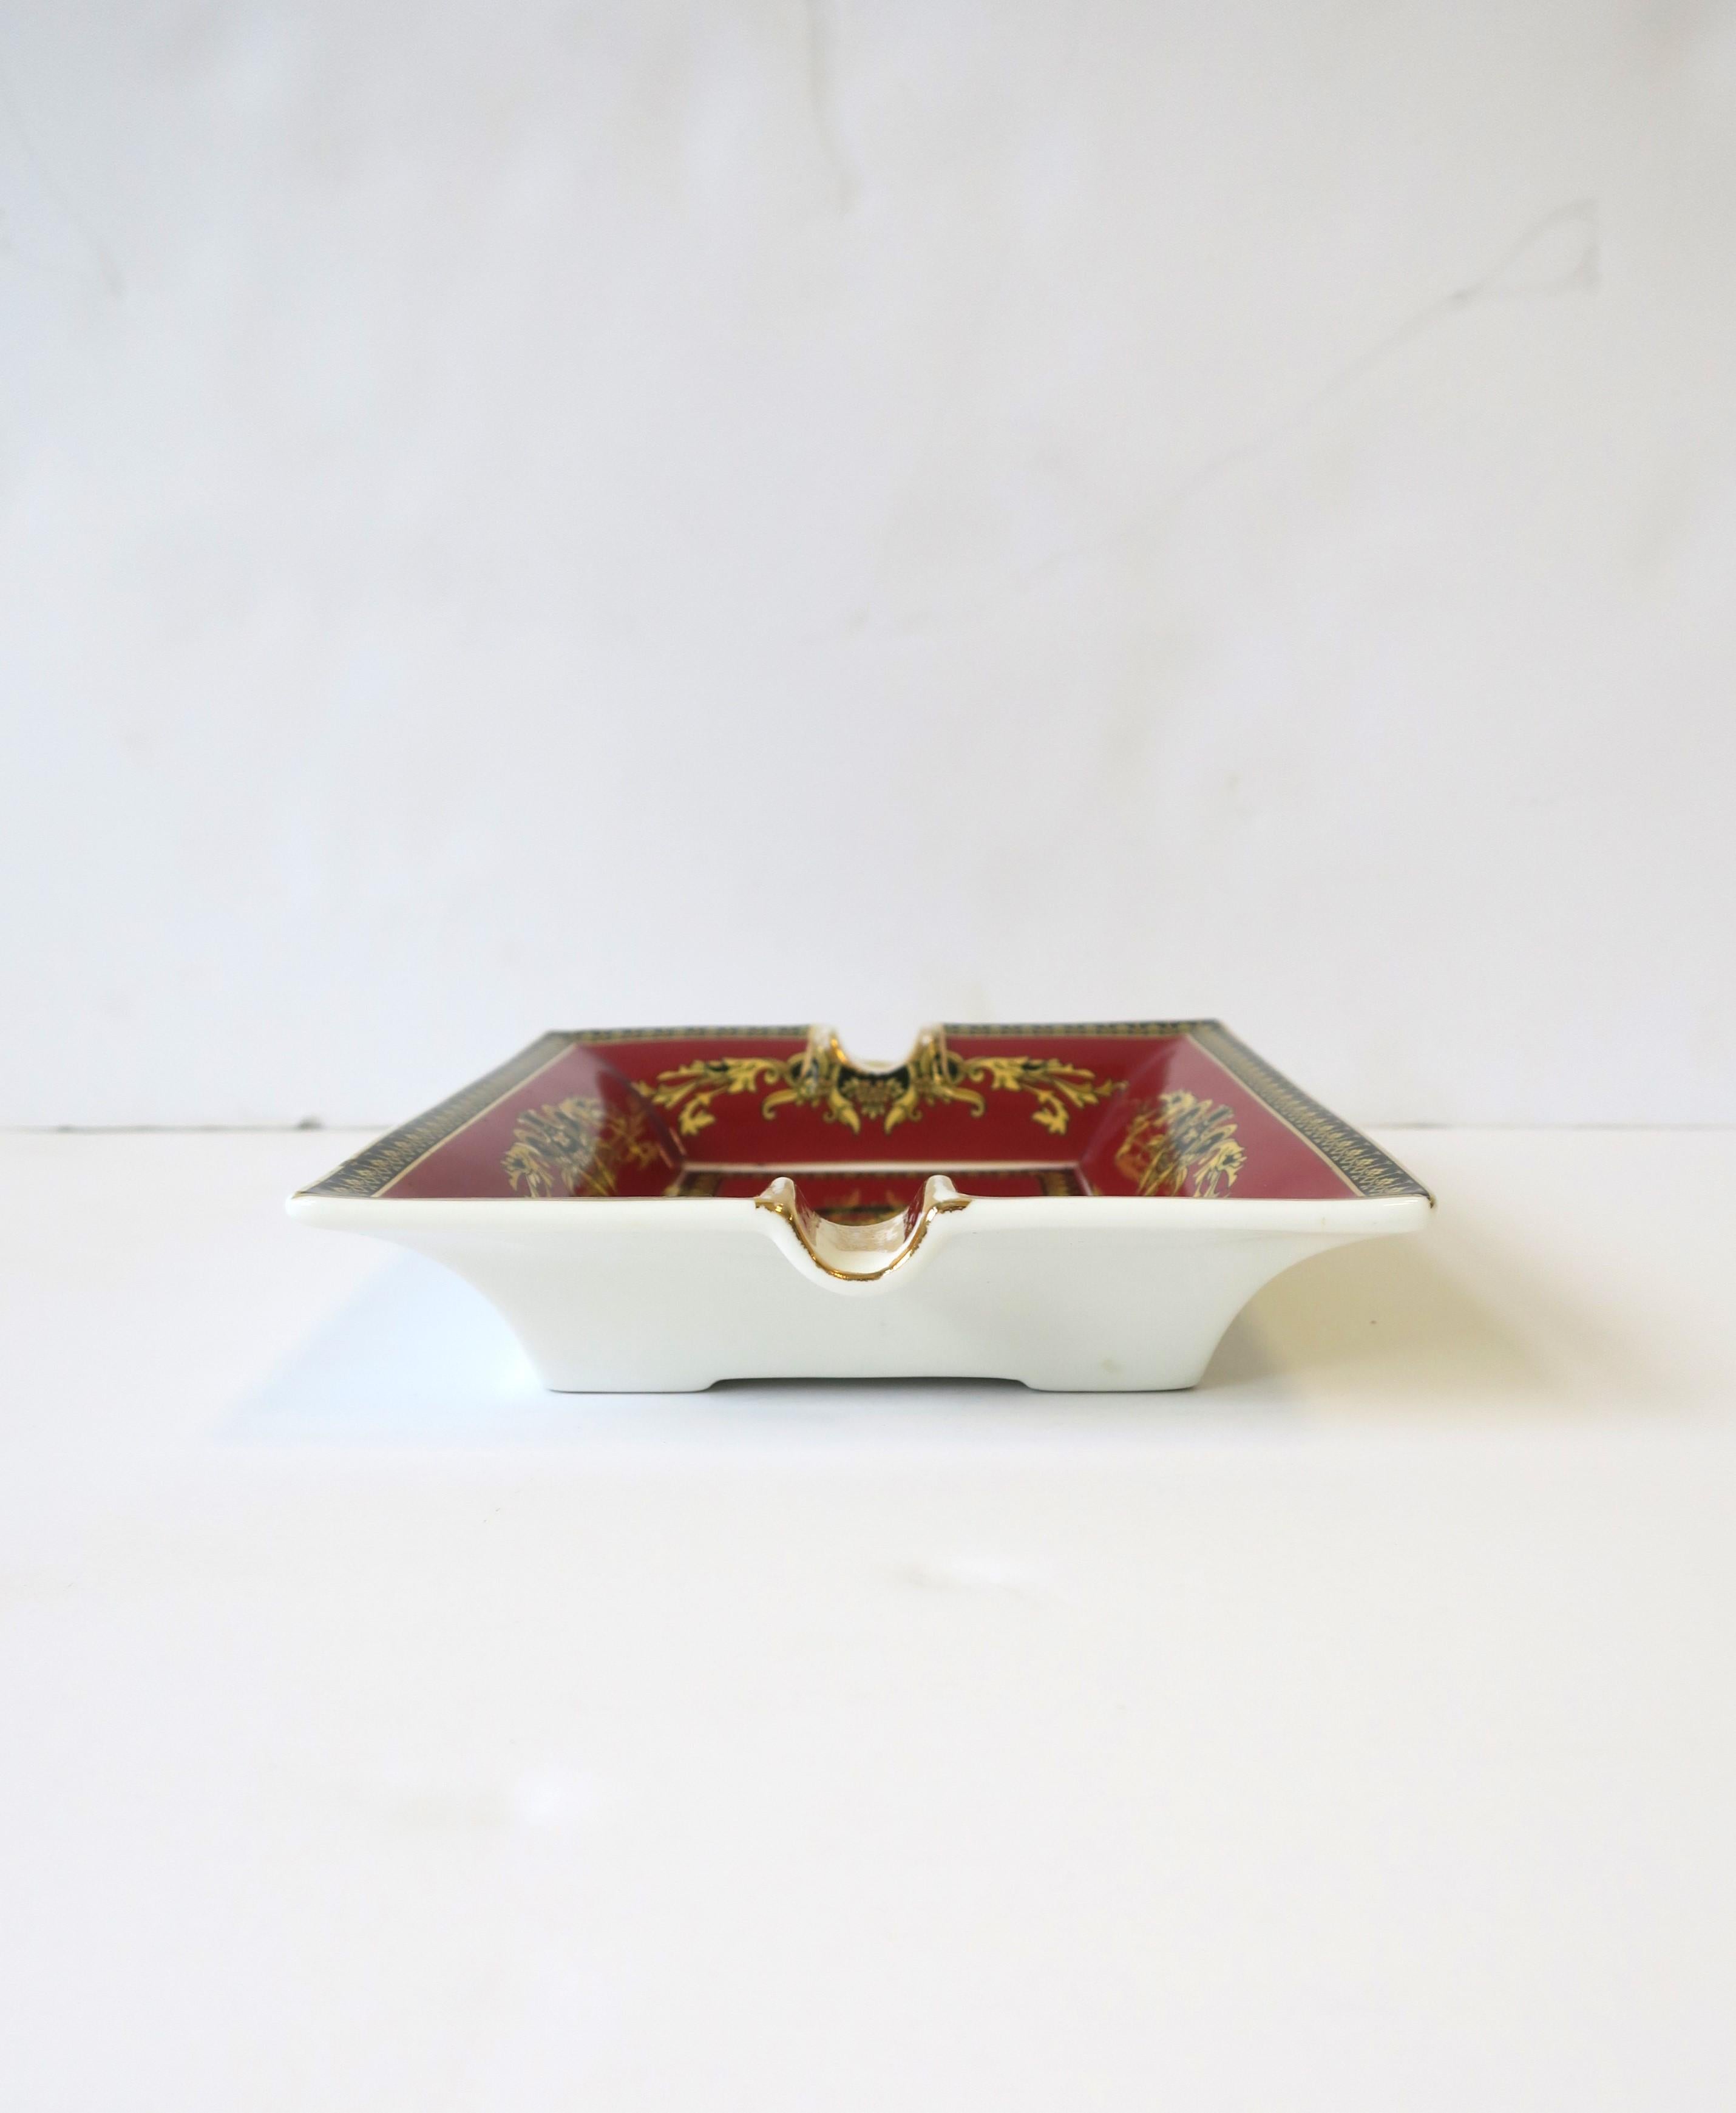 20th Century Versace Medusa Porcelain Catchall Tray Dish or Ashtray in Red Burgundy & Gold